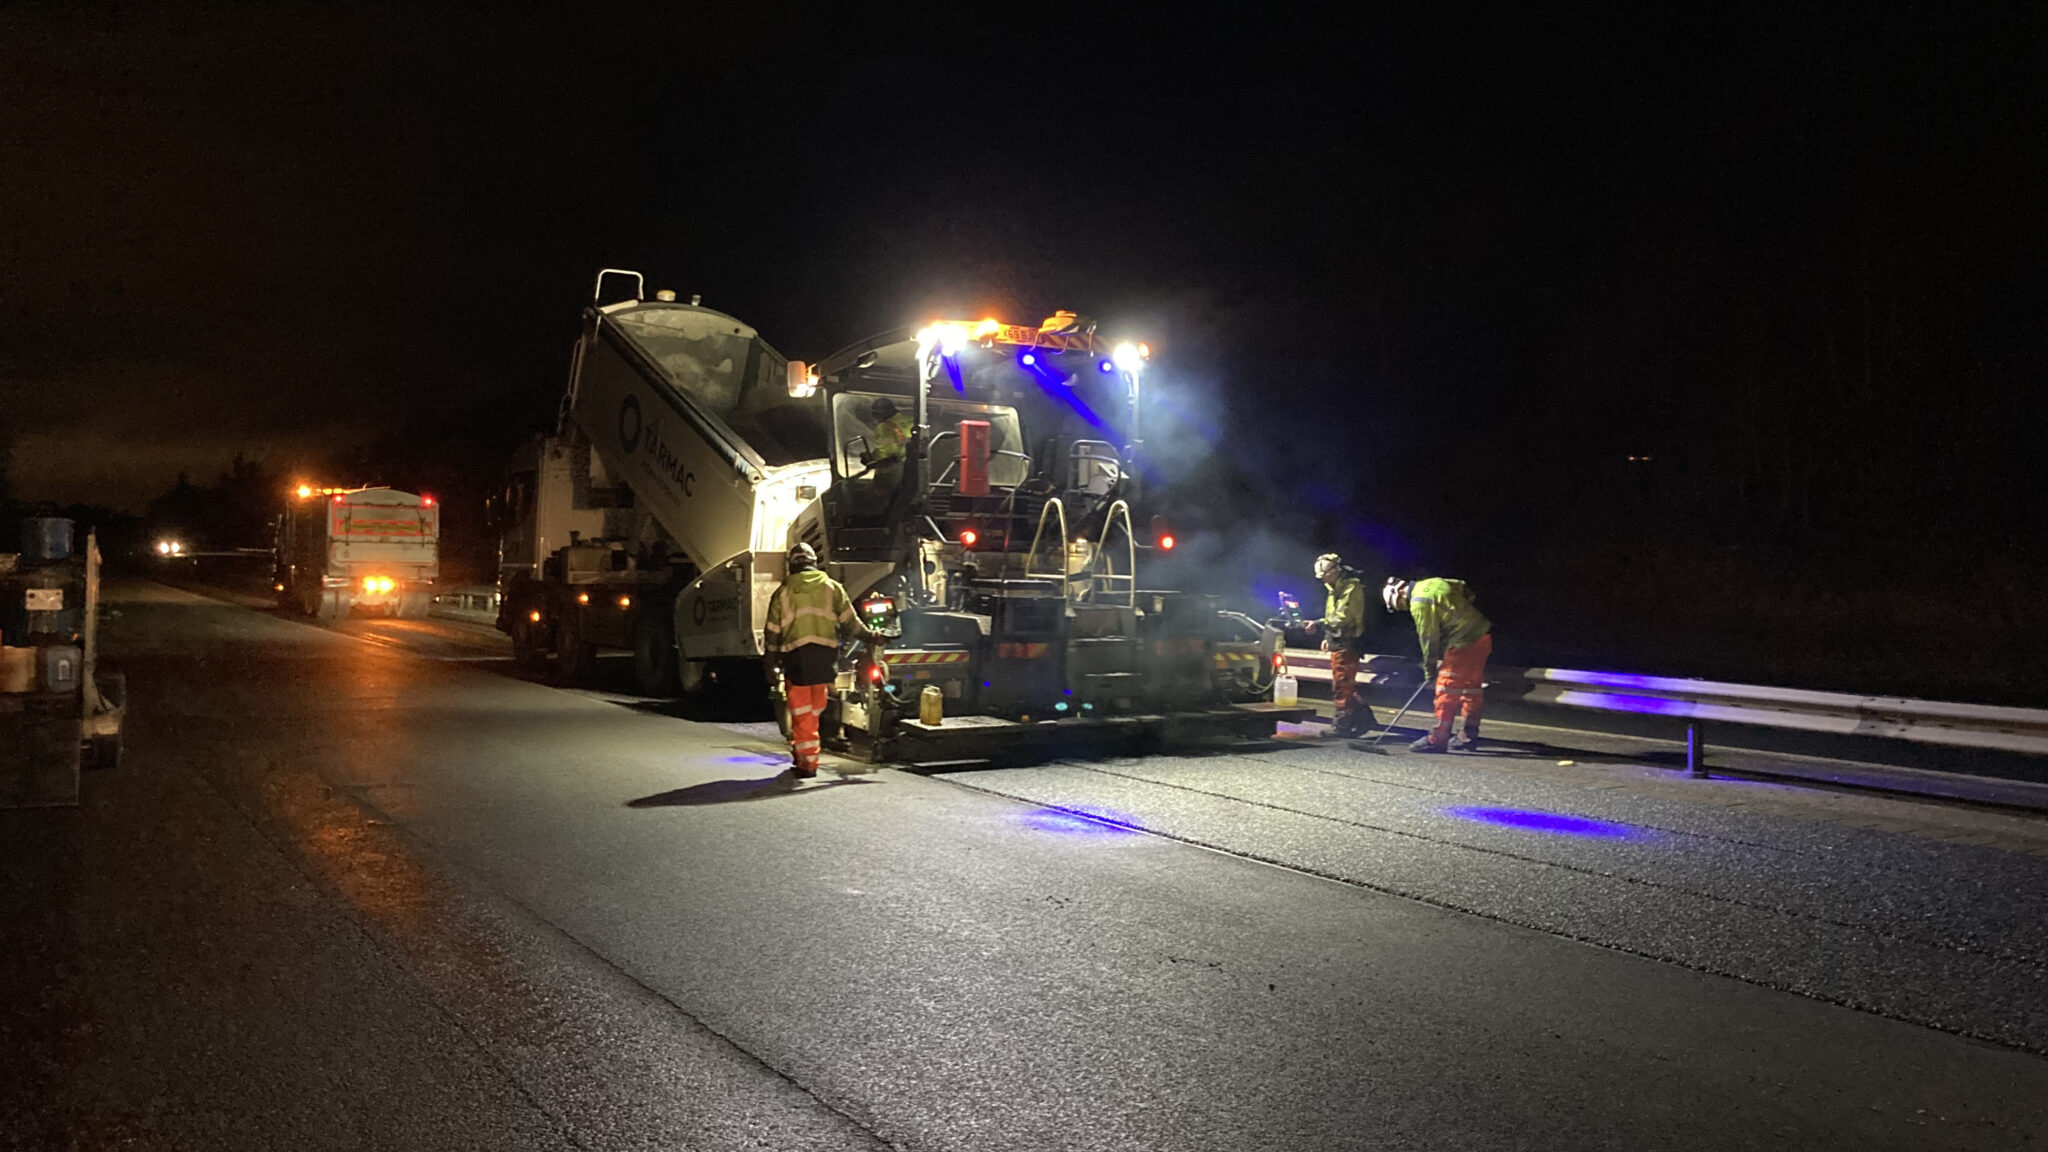 OVERNIGHT RESURFACING WORKS ON THE A1